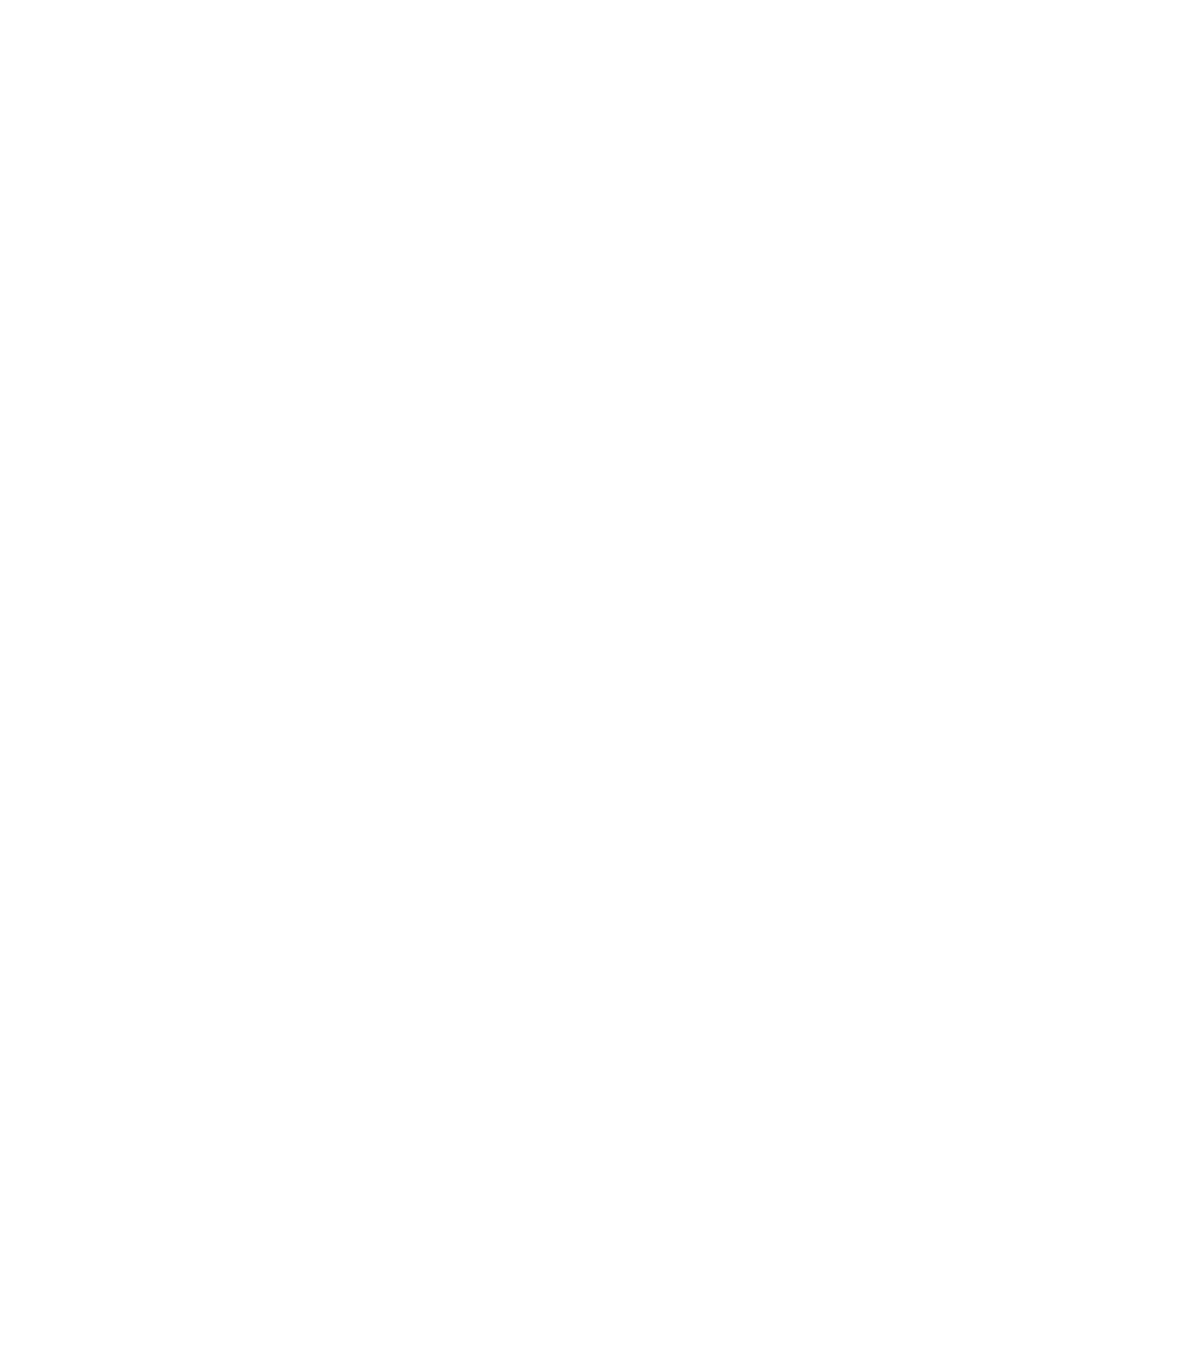 typo-500ans.png